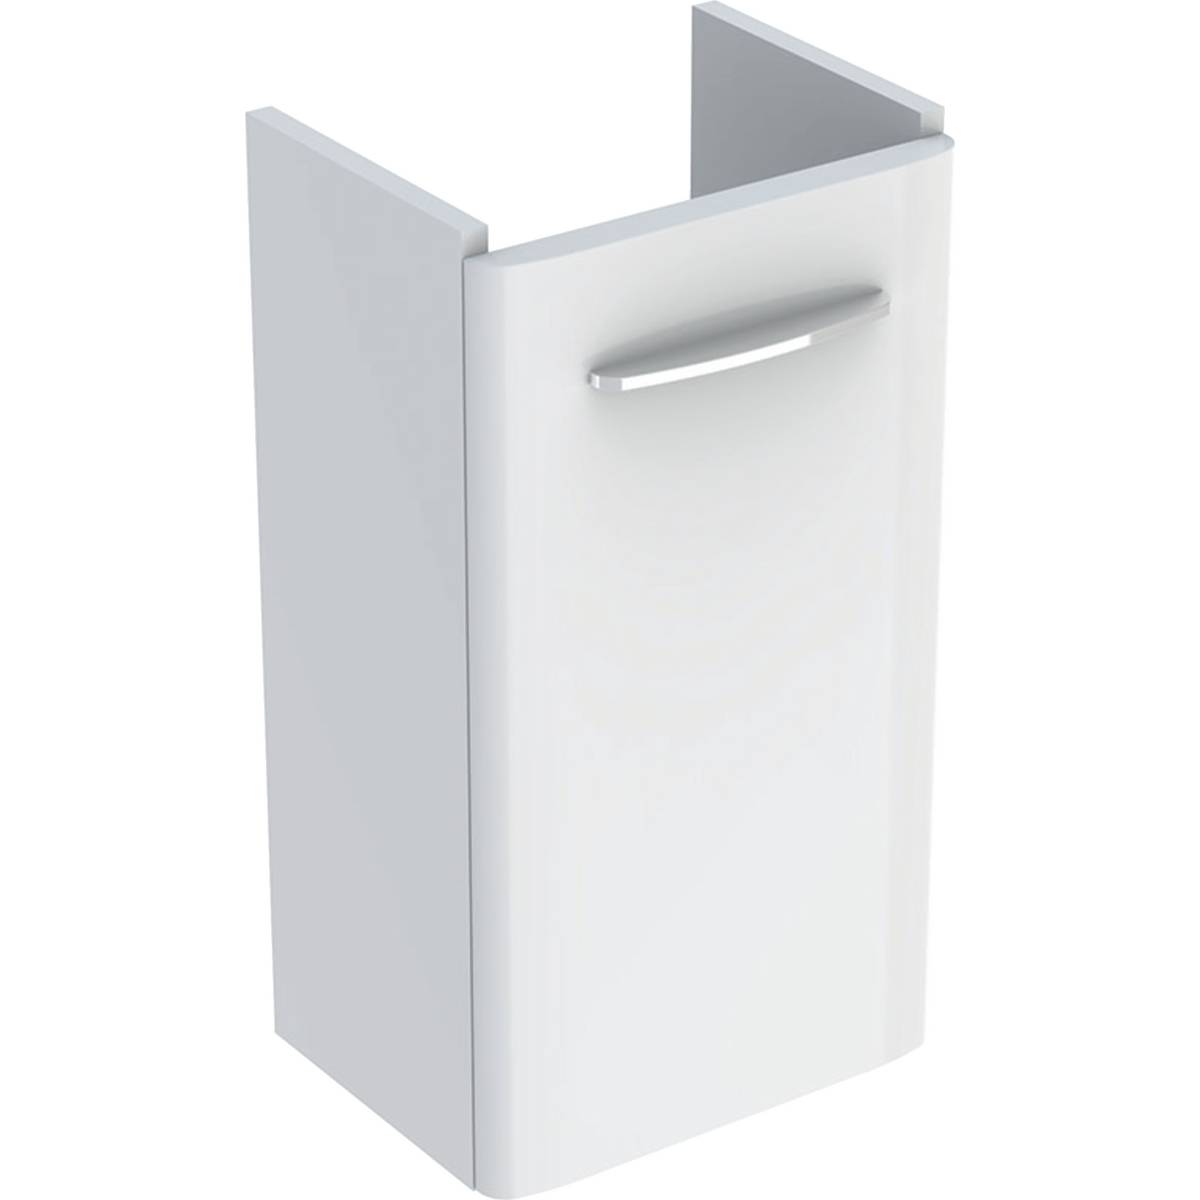 Selnova Square Cabinet for Handrinse Basin, with One Door